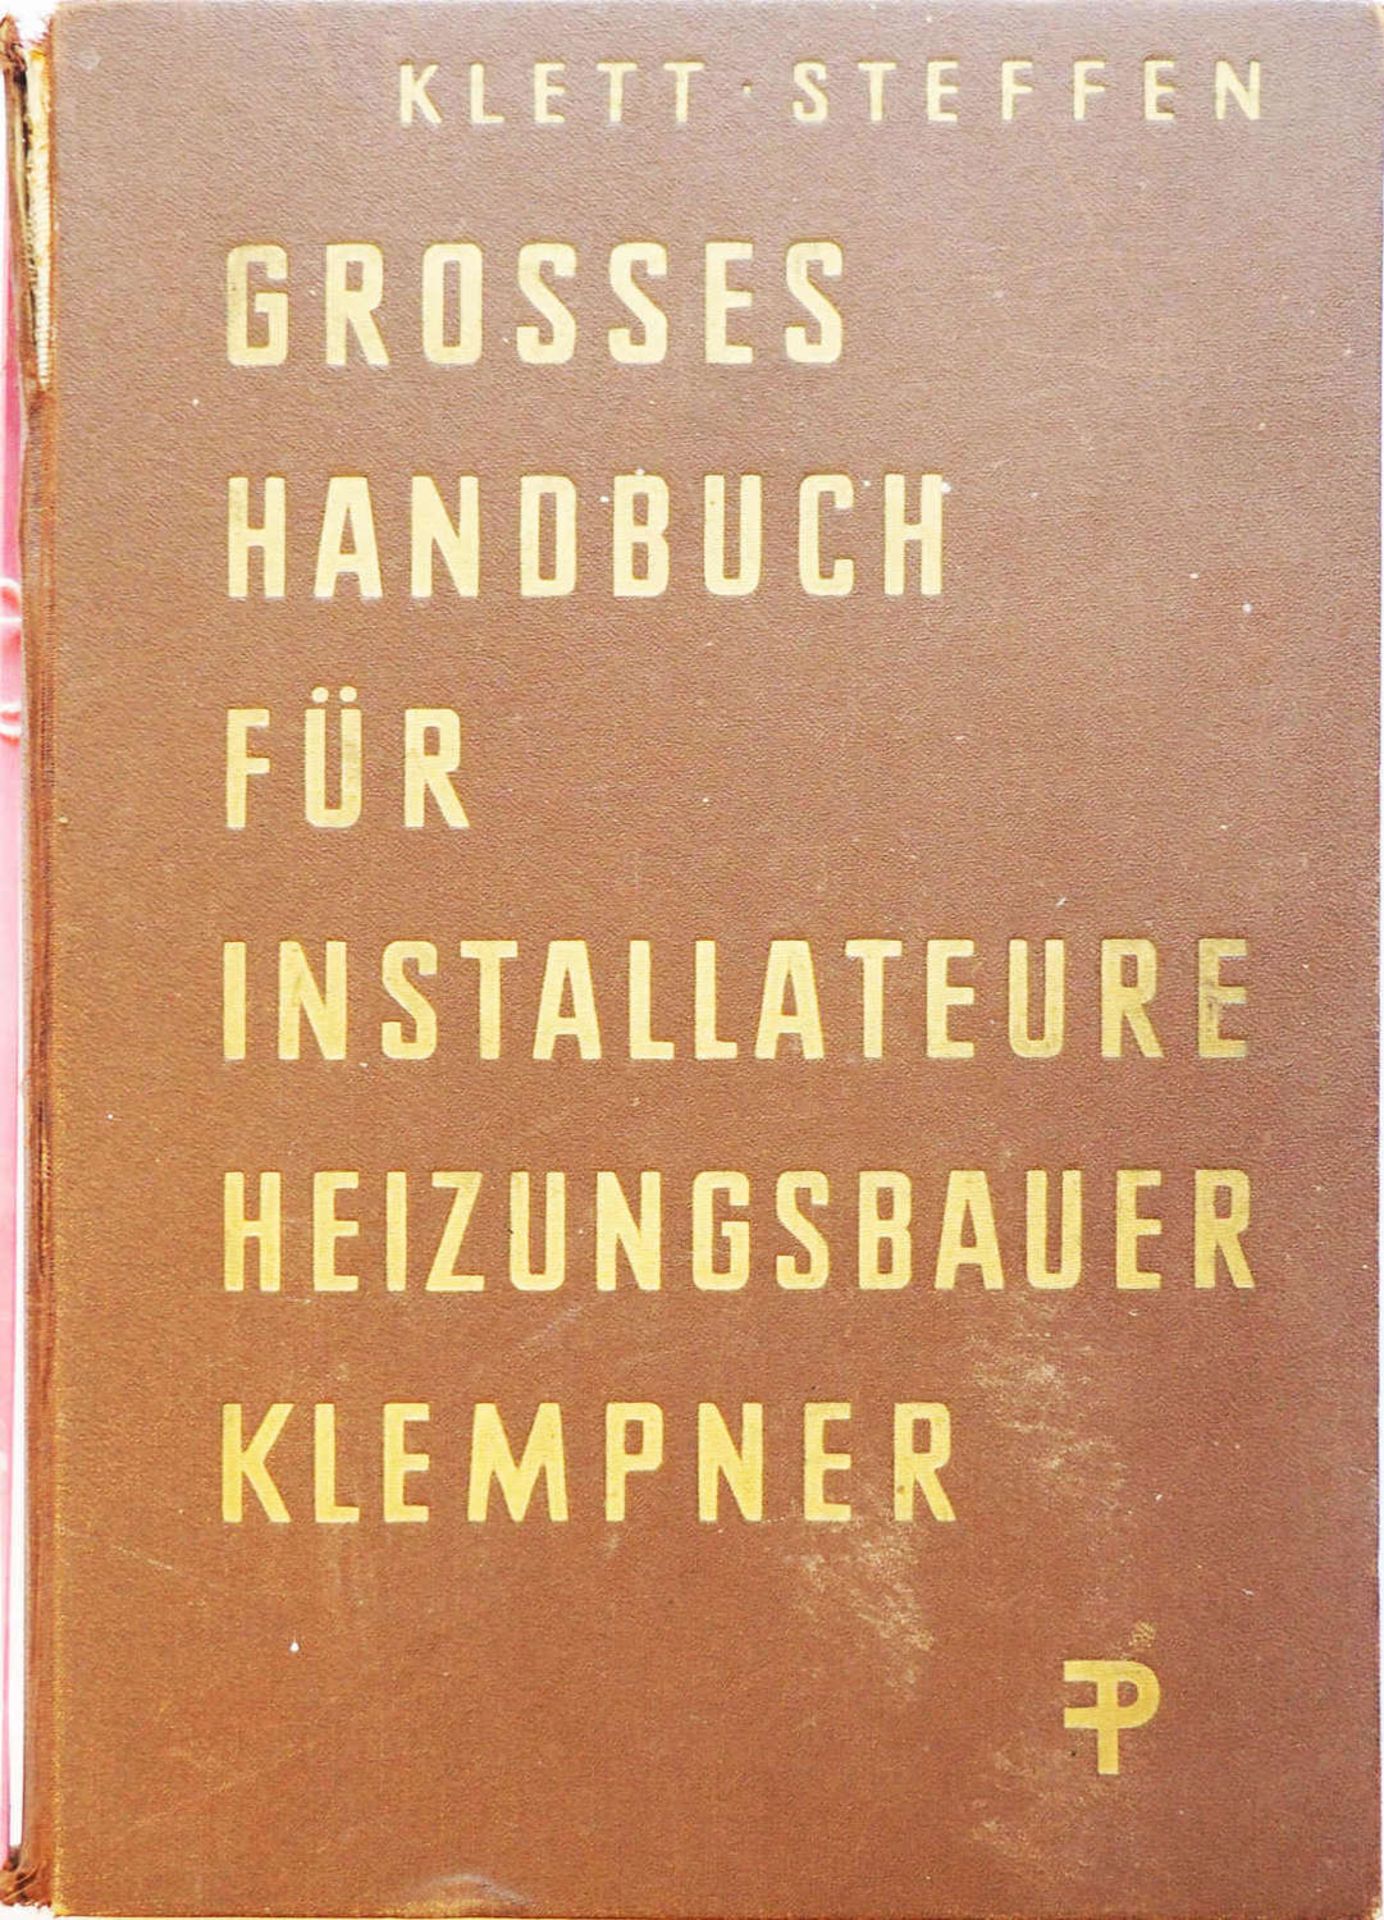 Klett-Steffen, Large manual for installers, heating engineers and plumbers, c. 1954